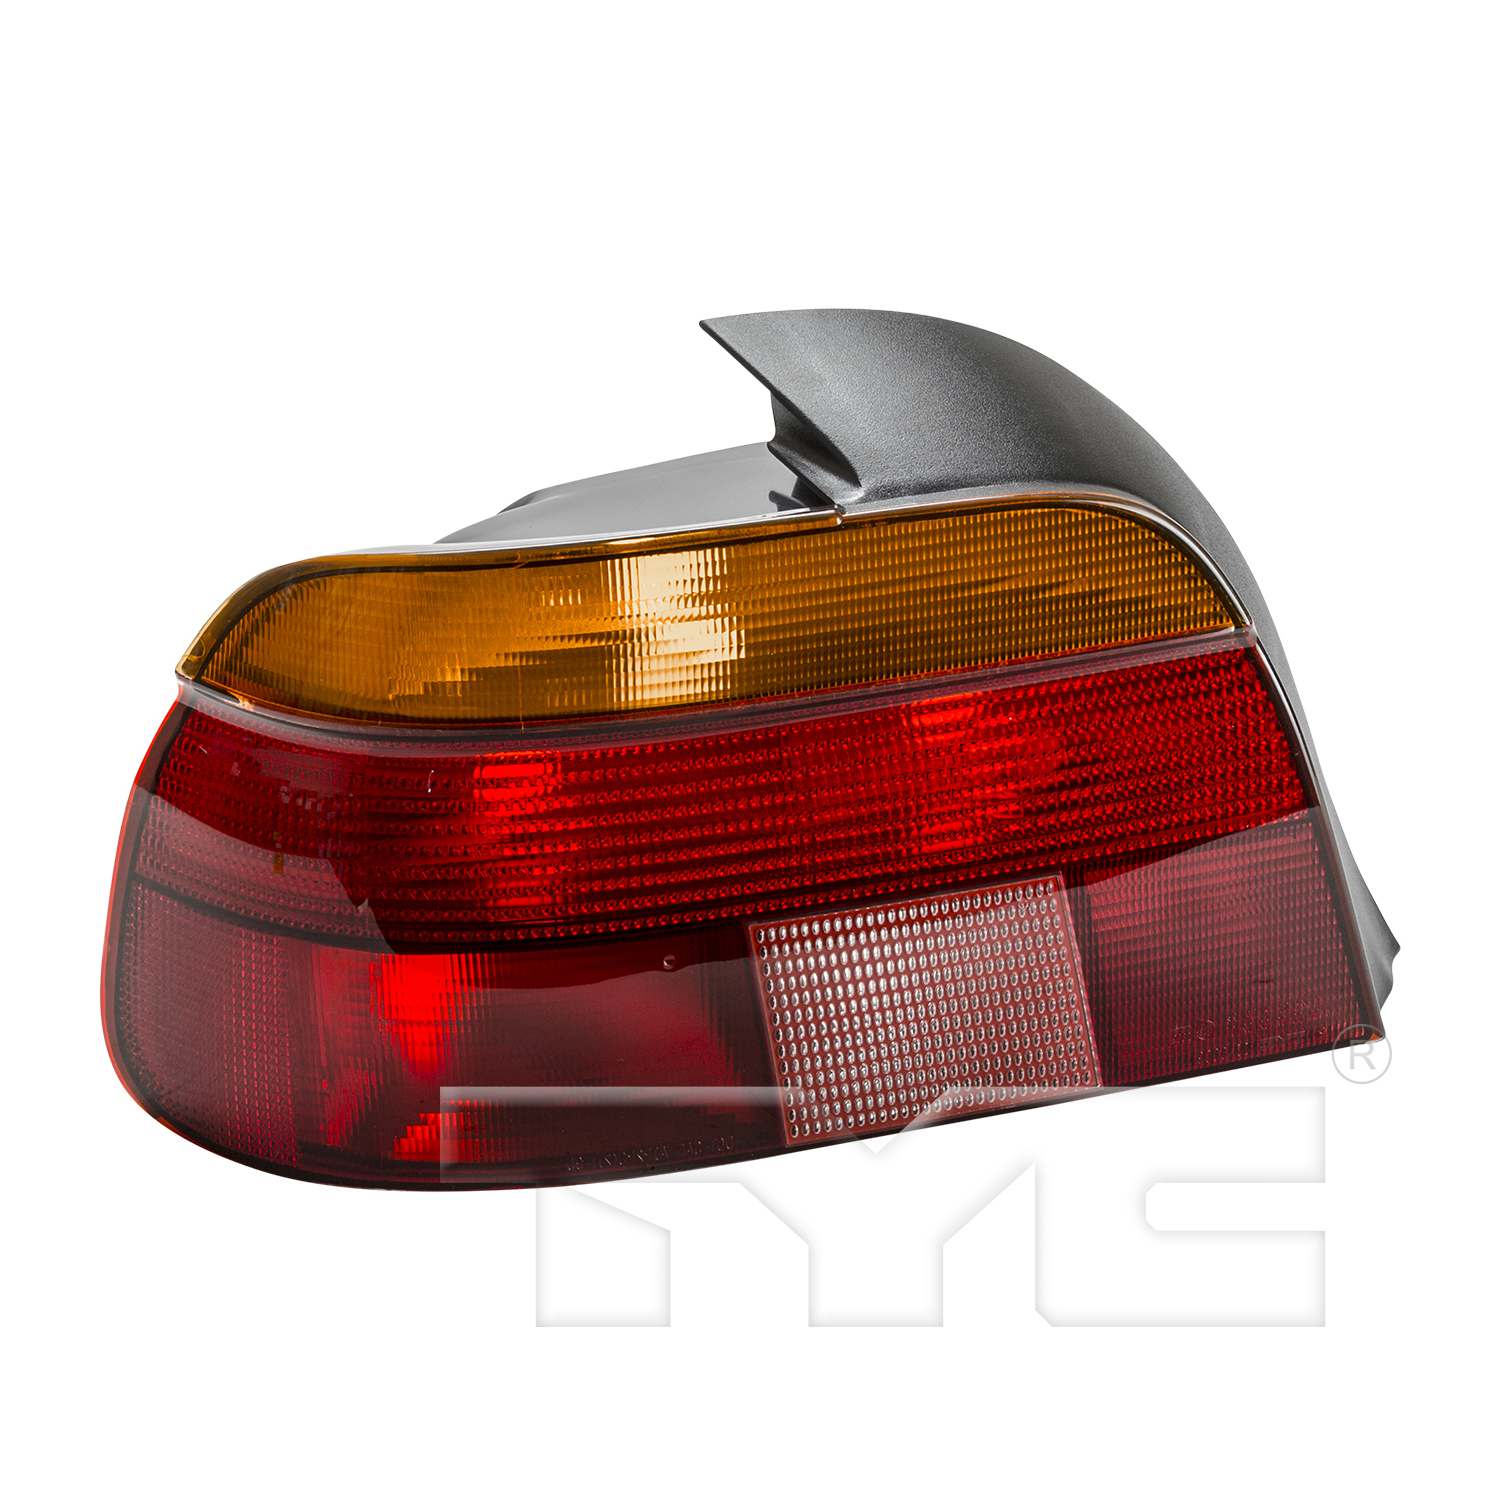 Aftermarket TAILLIGHTS for BMW - 528I, 528i,97-00,LT Taillamp assy